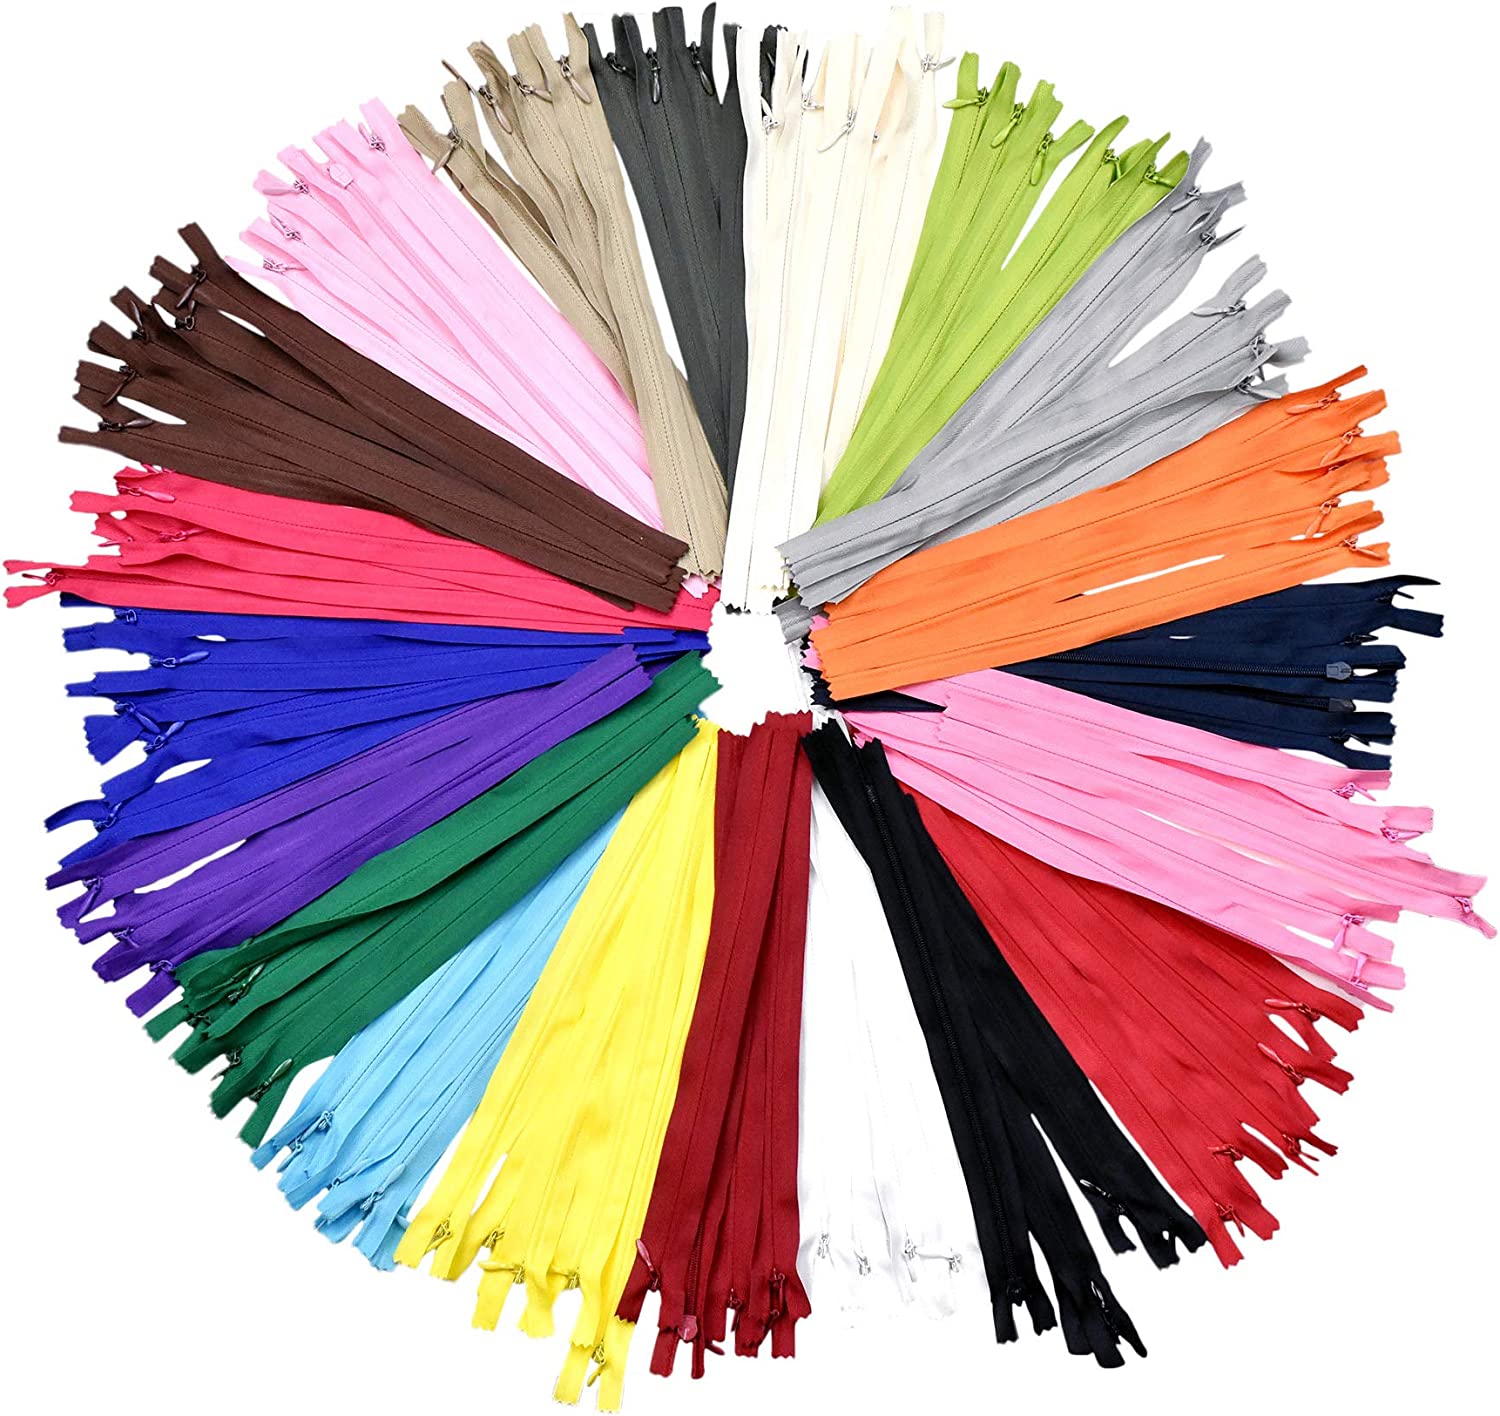 Nylon Invisible Zipper for Sewing, 14 Inch Bulk Hidden Zipper Supplies in 20 Assorted Colors; by Mandala Crafts